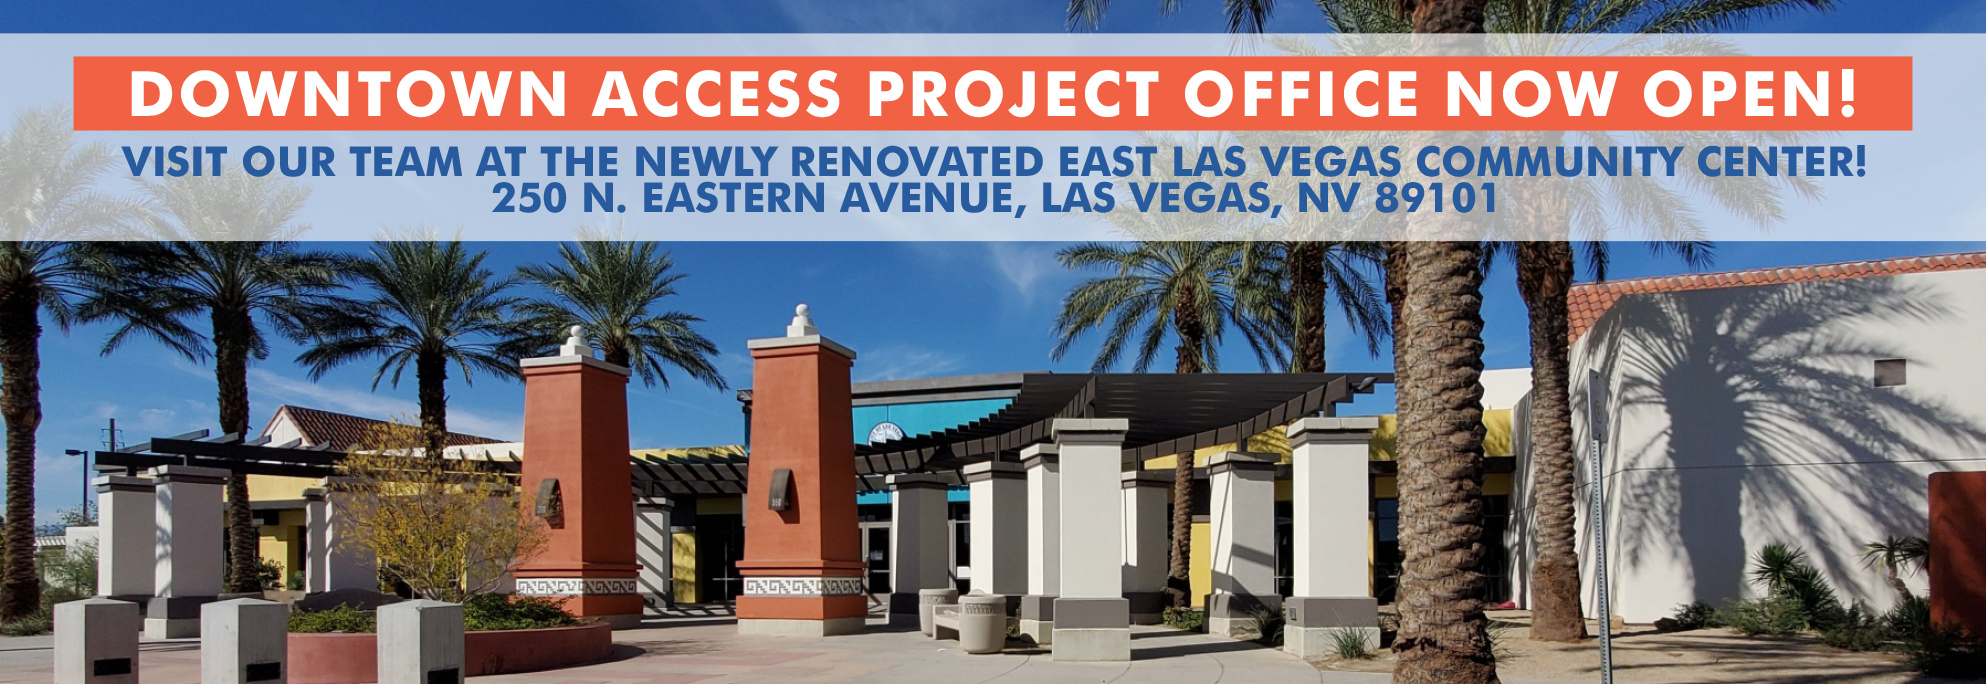 Downtown access project office now open! Visit our team at the newly renovated East Las Vegas Community Center! 250 N. Eastern Avenue, Las Vegas, NV 89101.